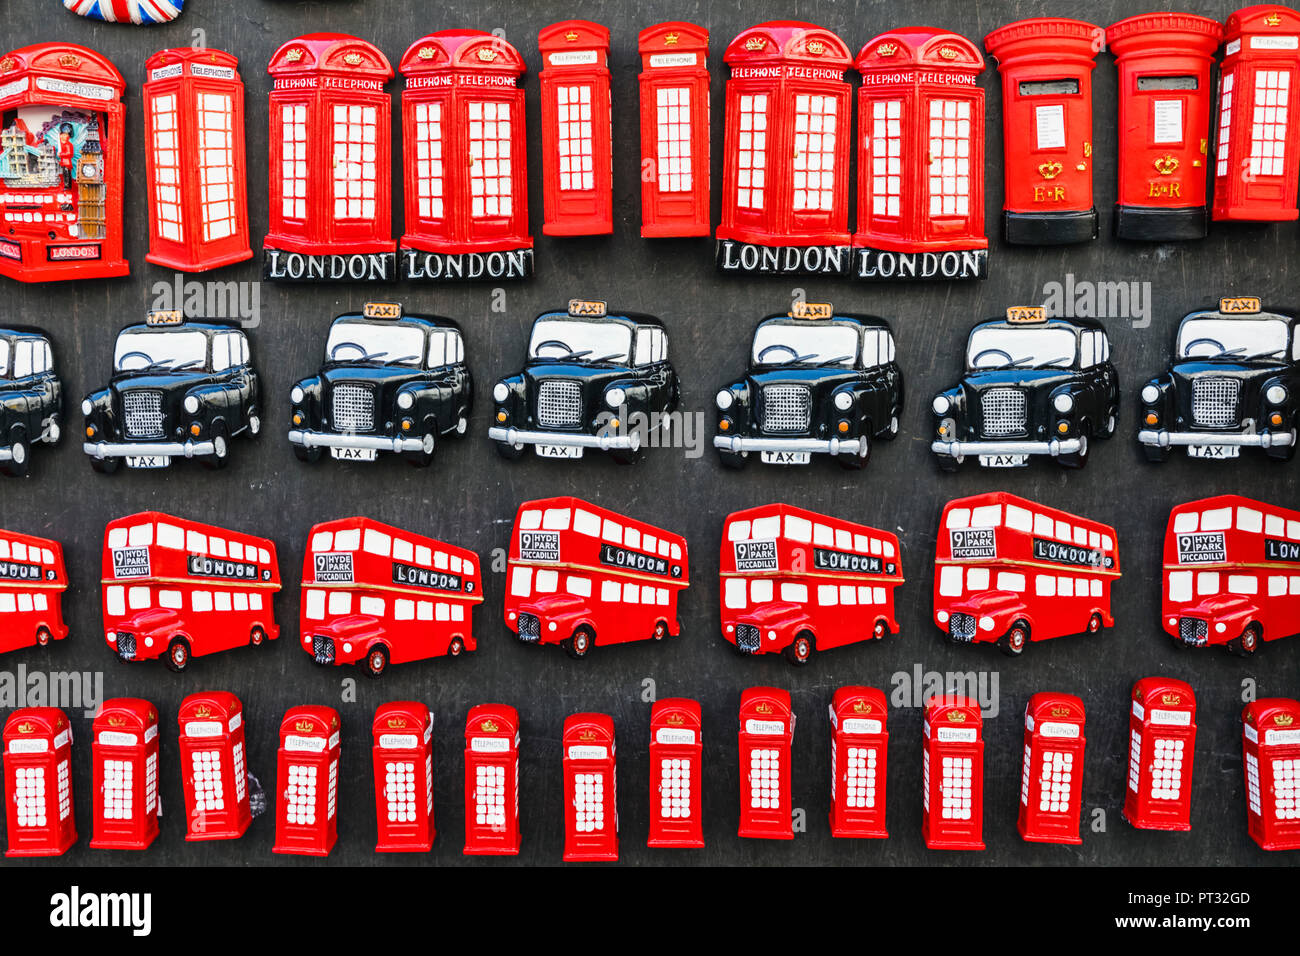 England, London, Souvenir Shop Display of Fridge Magnets depicting Iconic Transport and Telephone Boxes Stock Photo